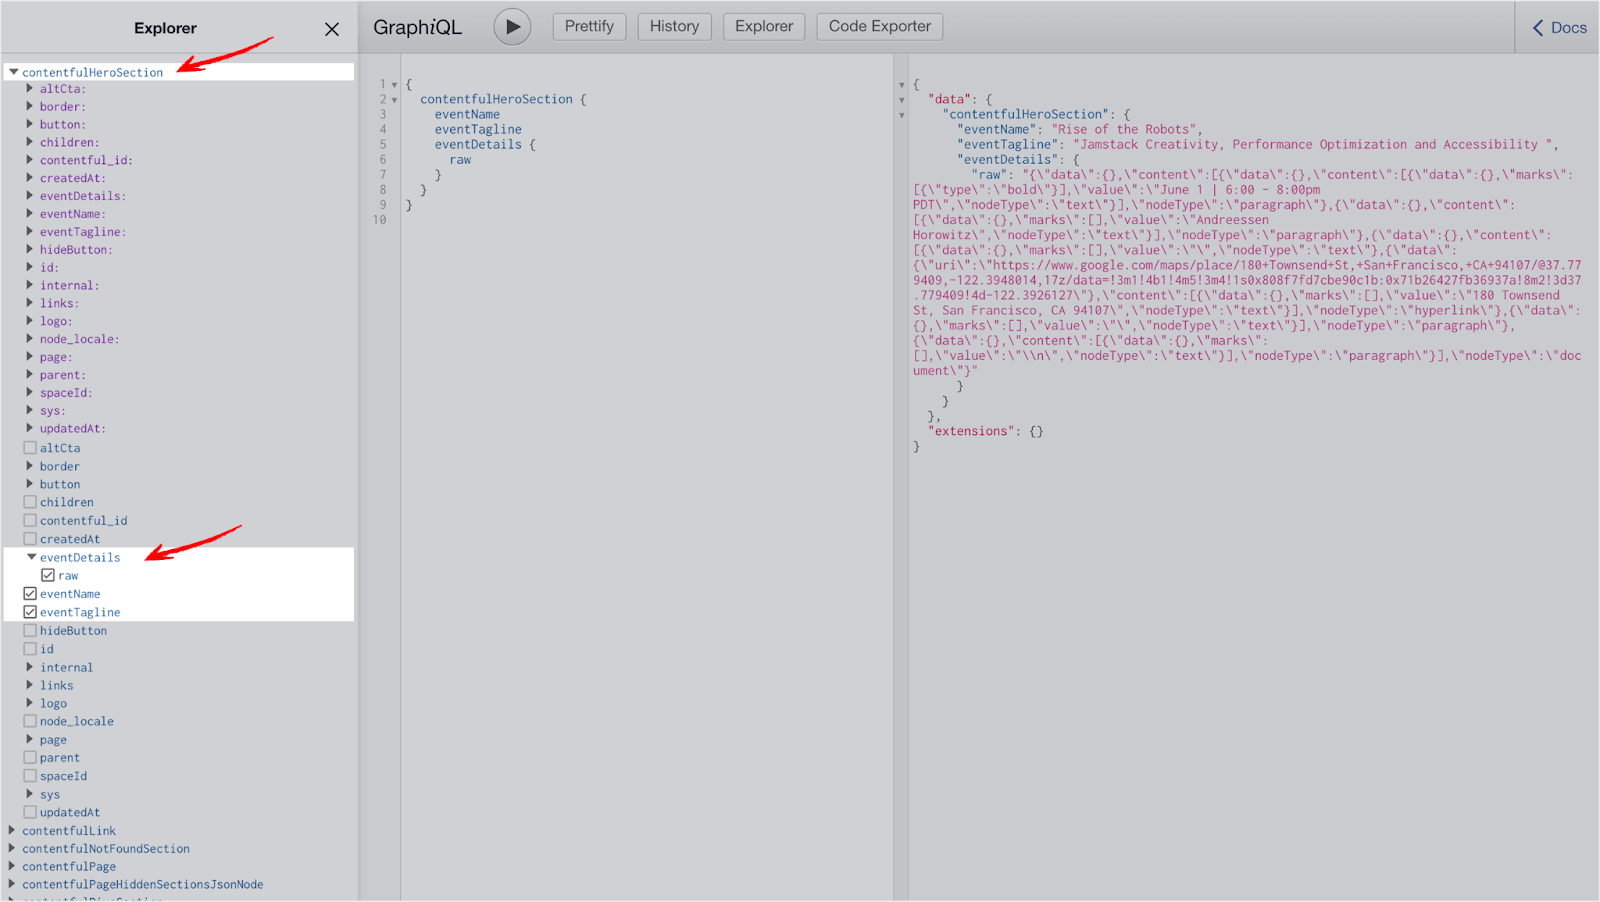 Image of GraphiQL wit selected data fields